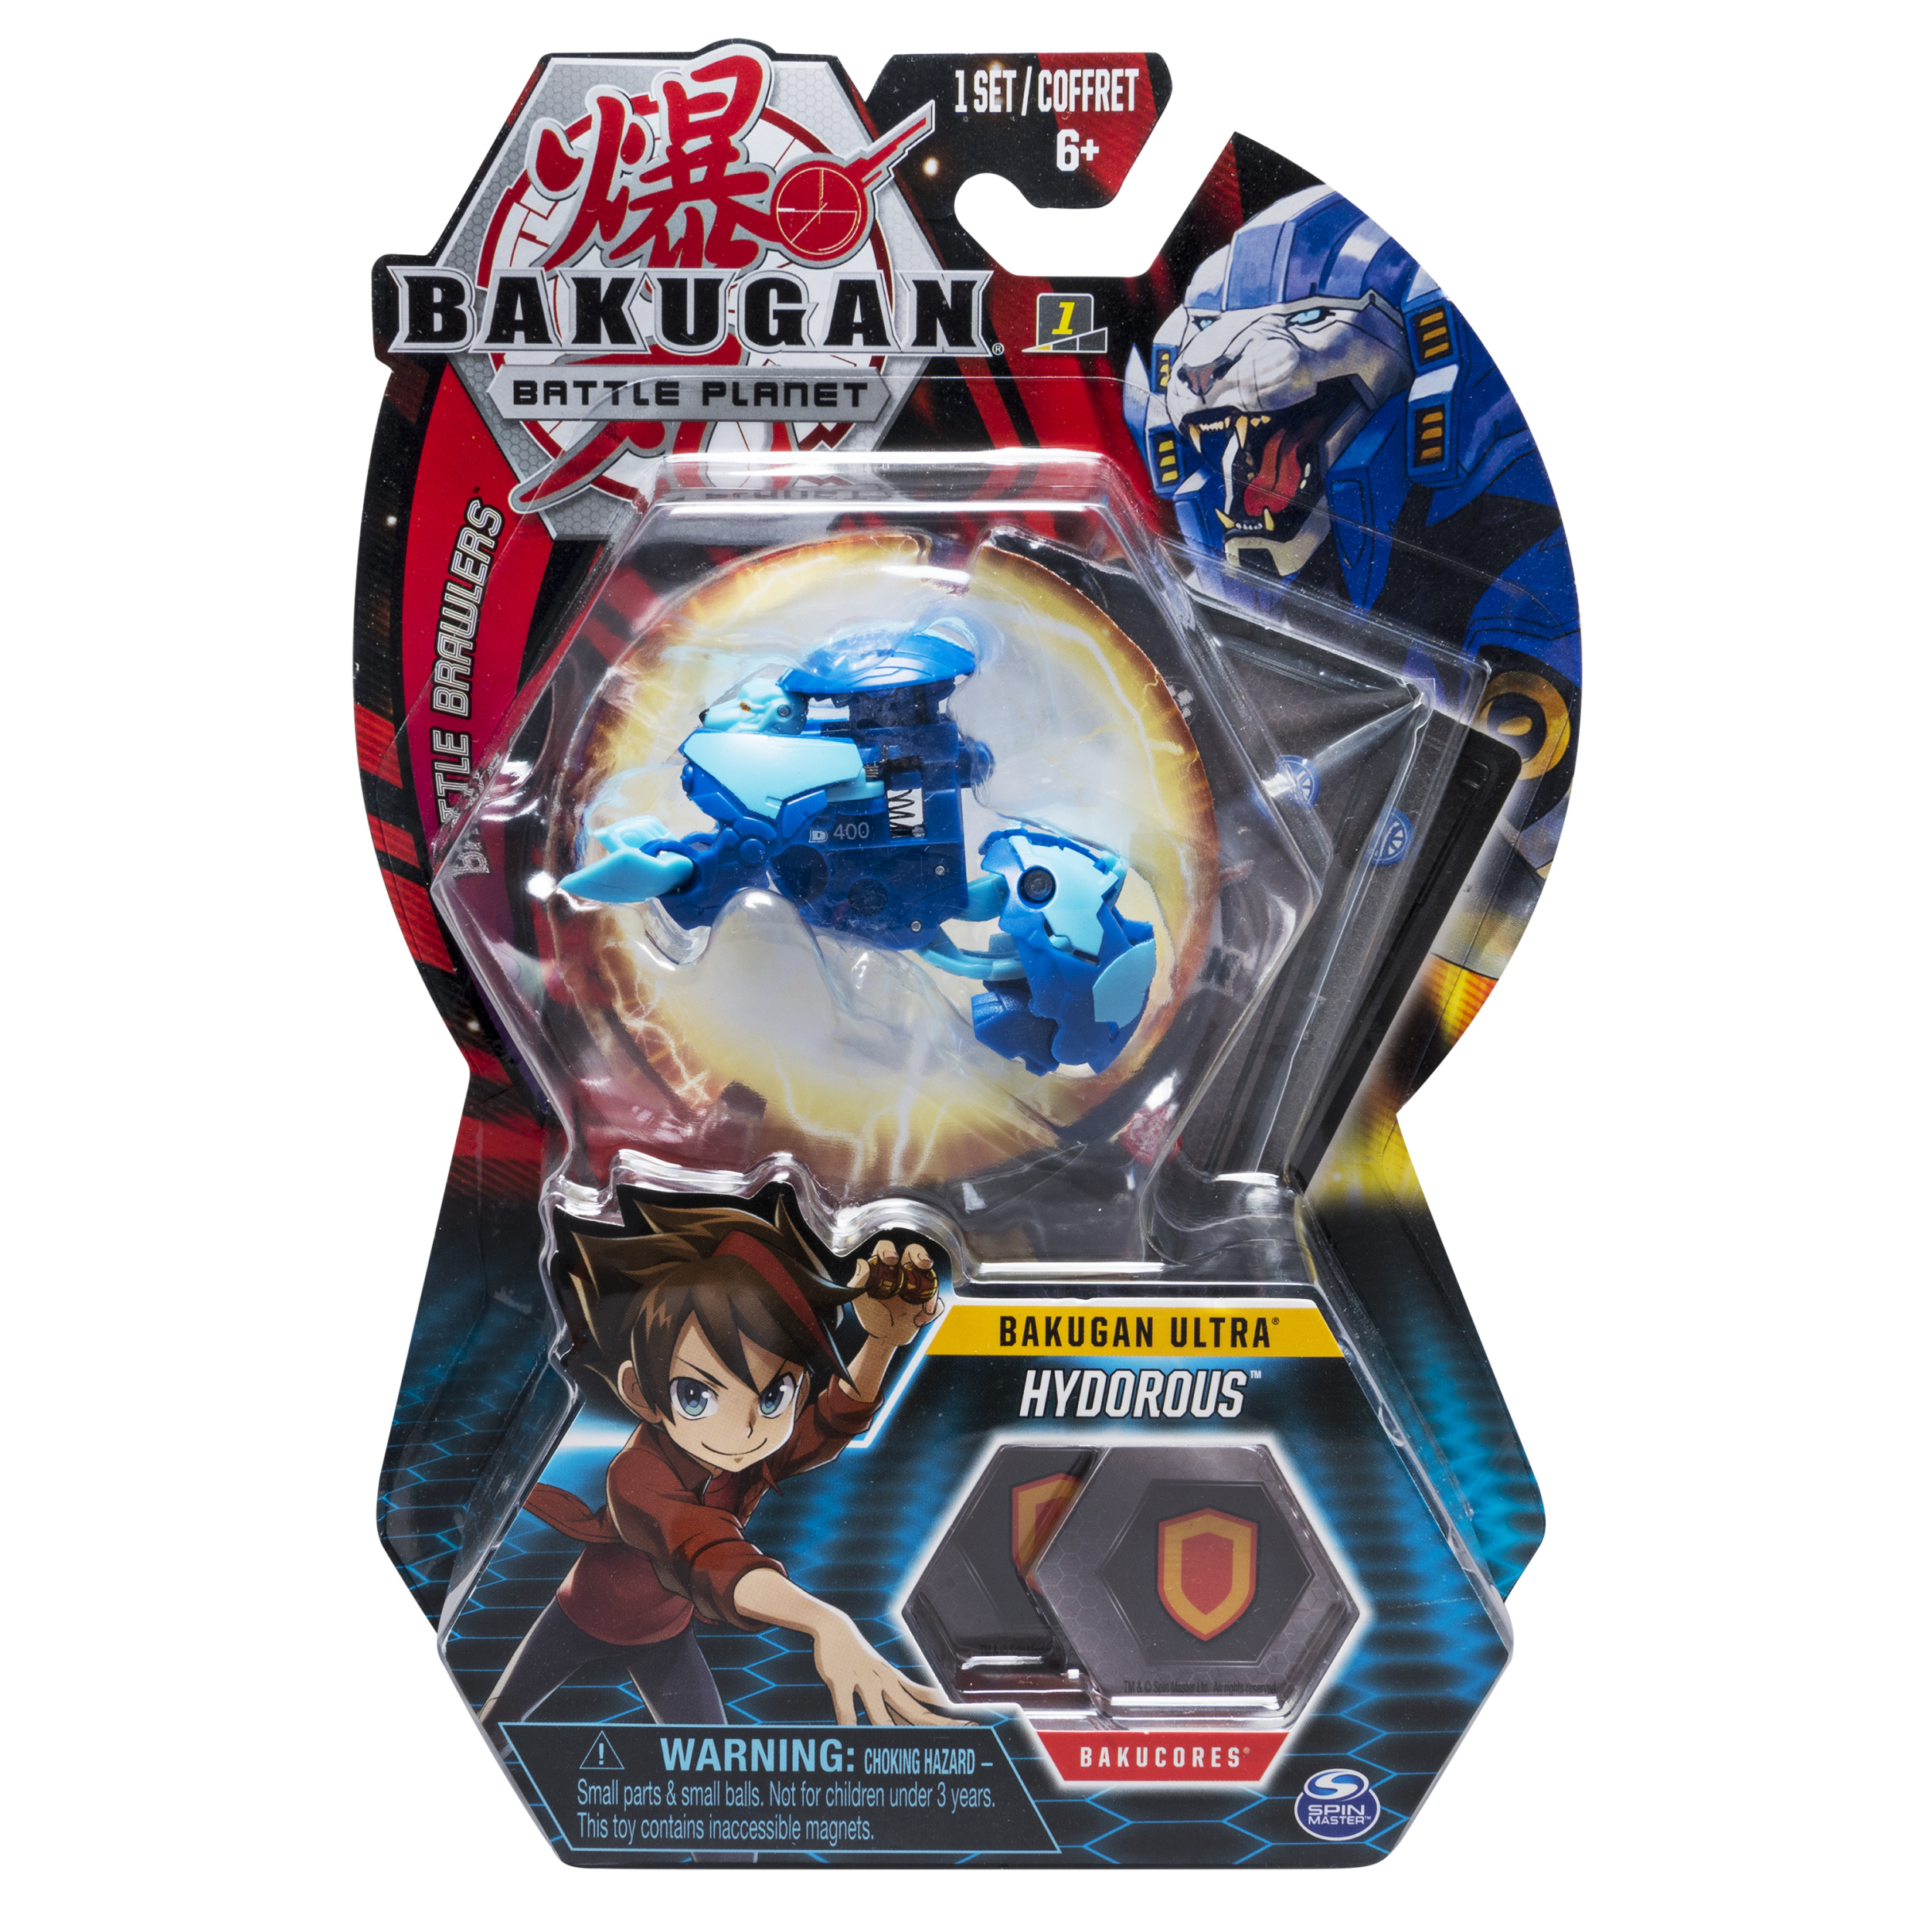 Bakugan Ultra, Hydorous, 3-inch Collectible Action Figure and Trading Card, for Ages 6 and up - image 1 of 5